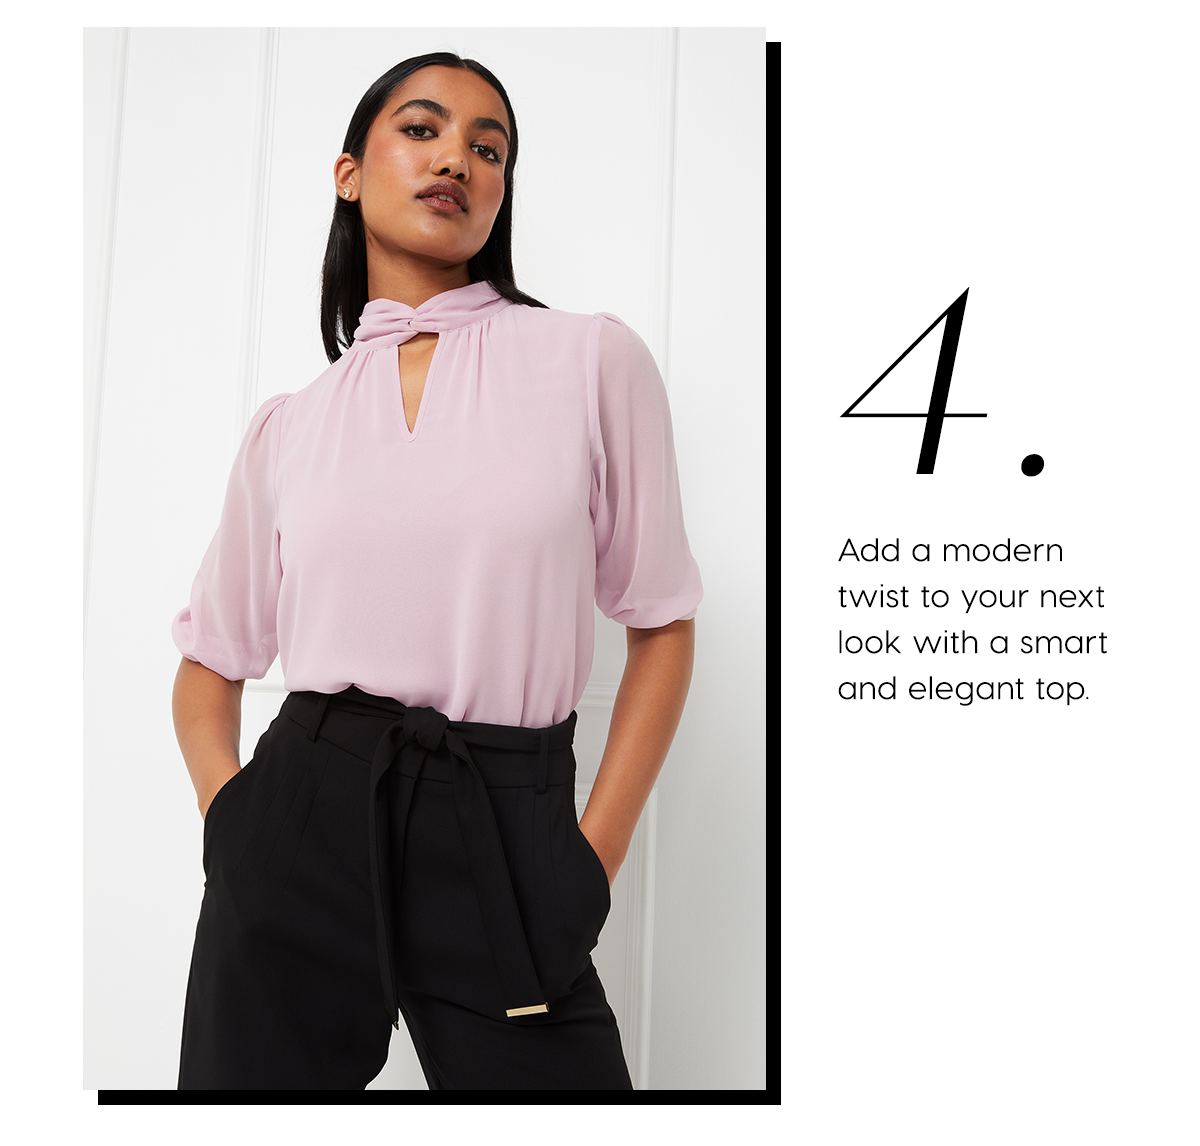 4. Add a modern twist to your next look with a smart and elegant top.  